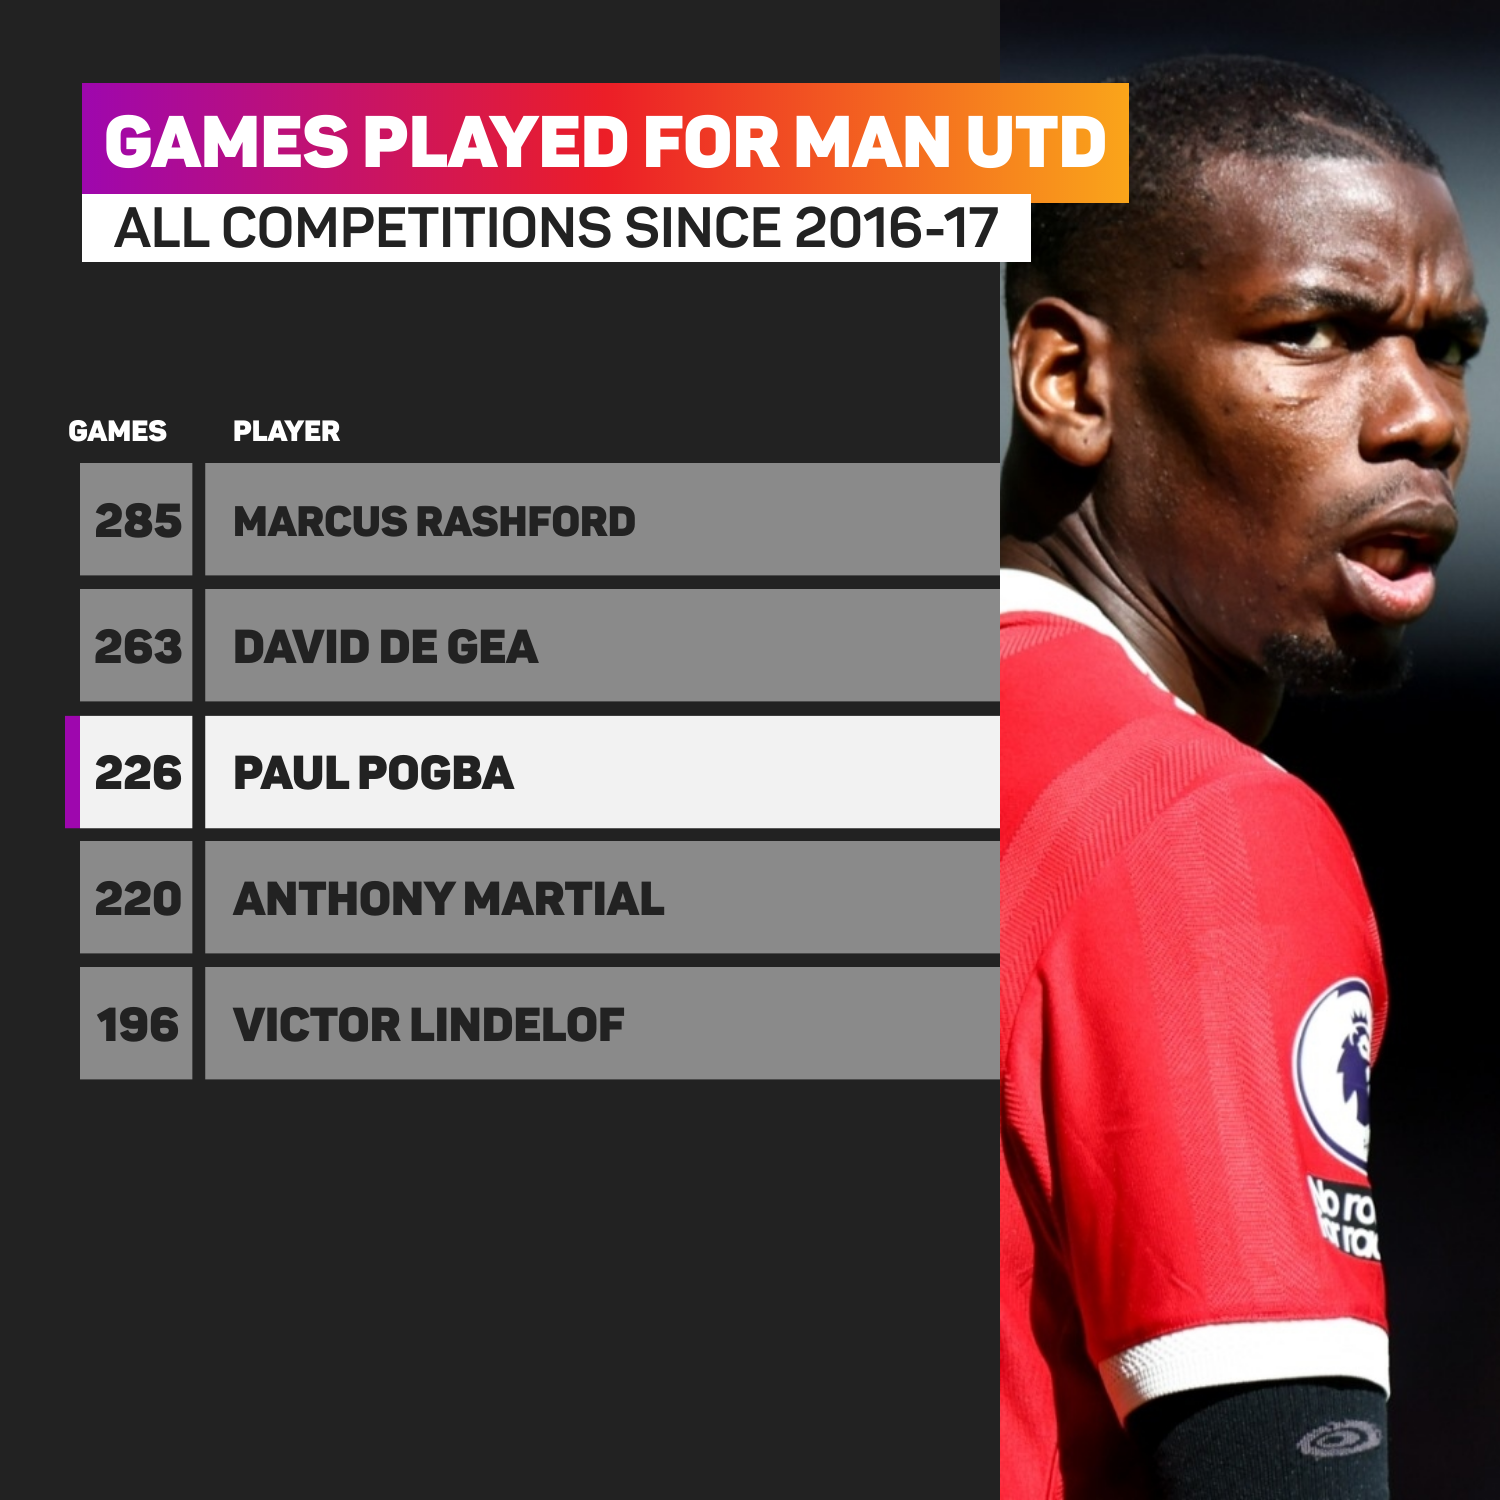 Paul Pogba played 226 games for Manchester United in his second spell at the club